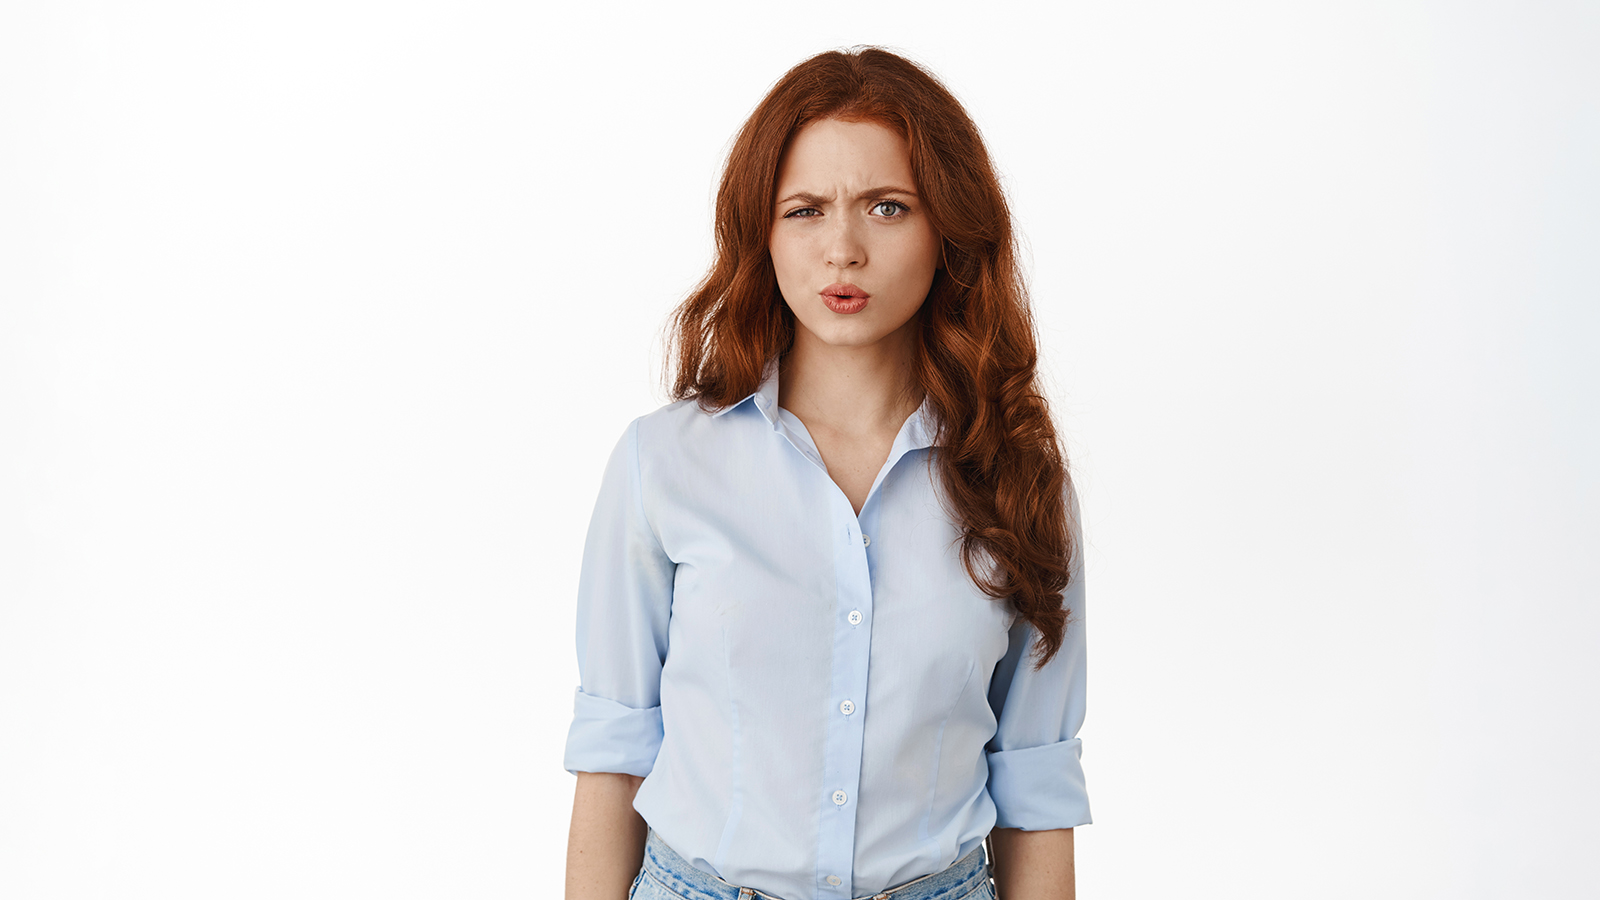 Confused redhead female office manager staring puzzled, frowning and looking with doubtful and skeptical face, cant understand something strange, standing questioned against white background